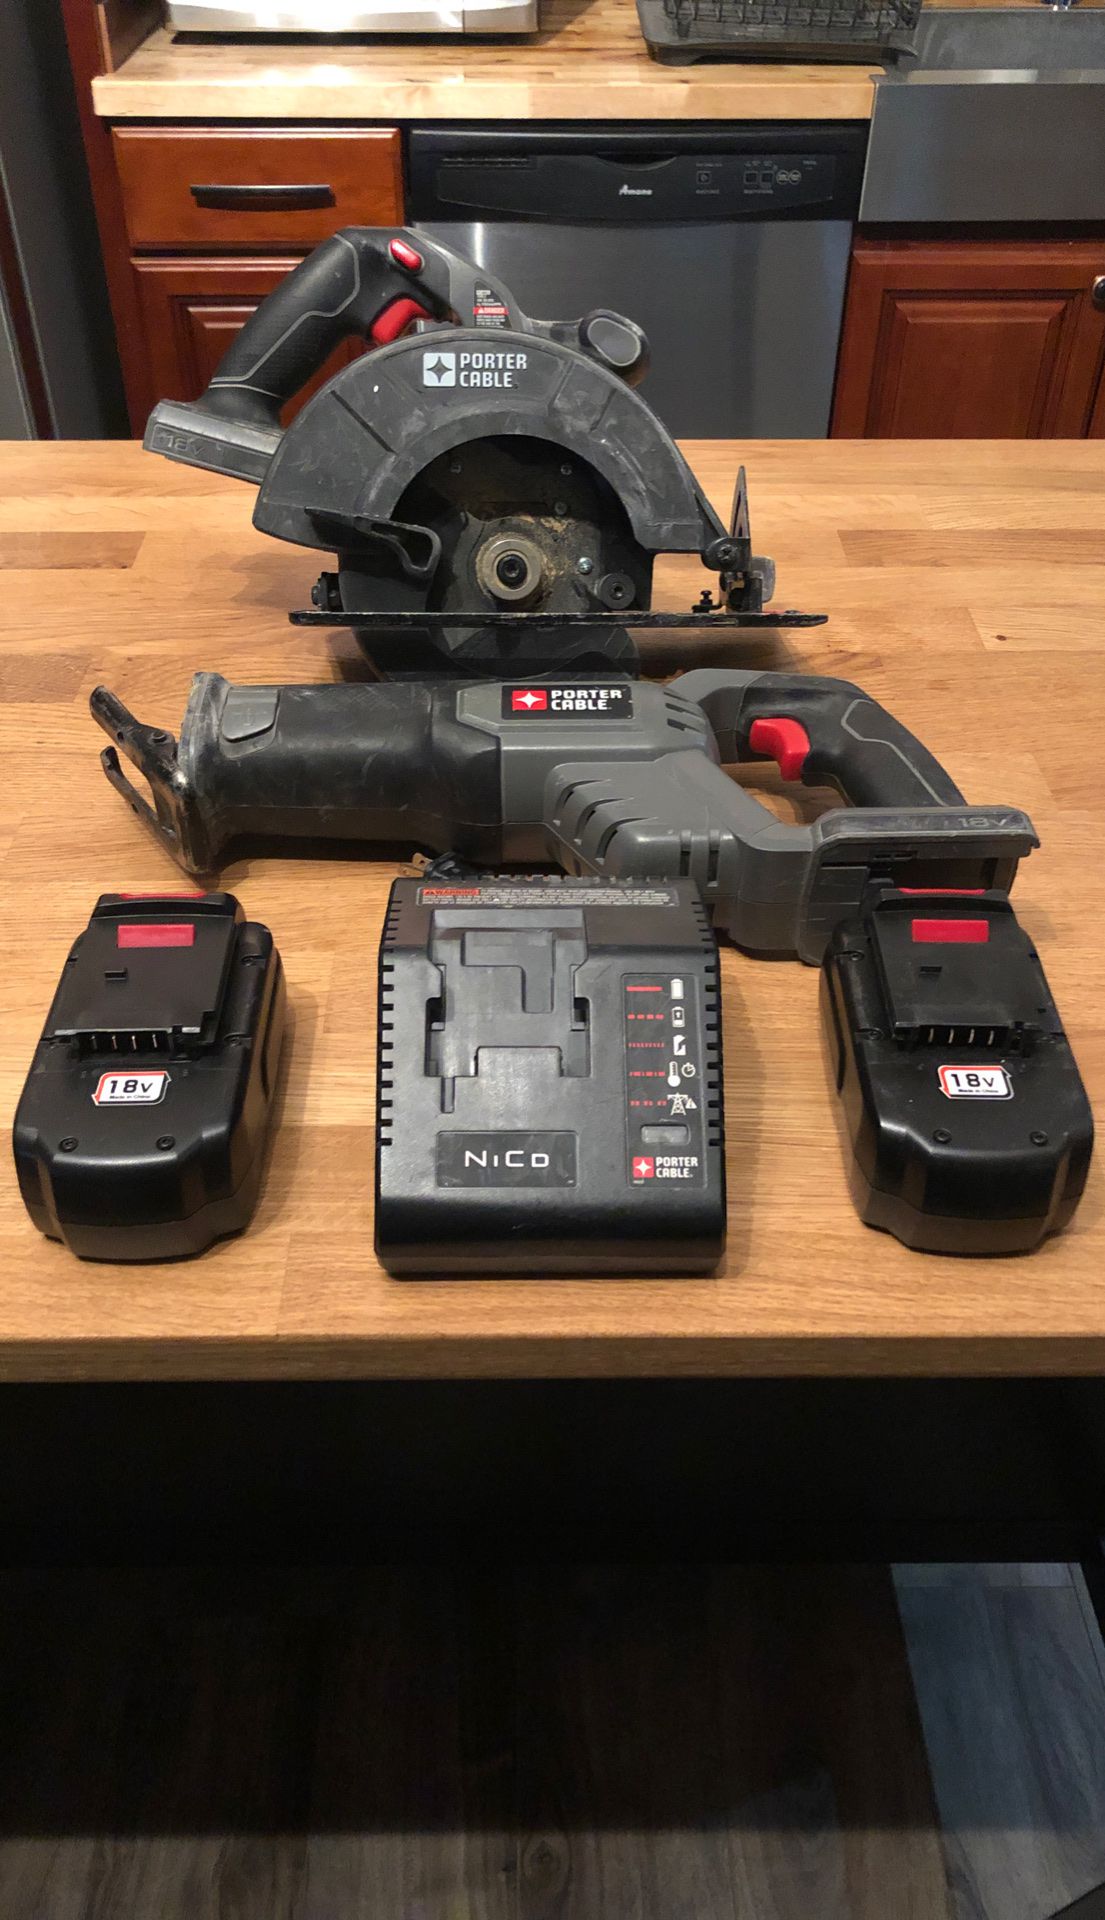 Porter cable power tools